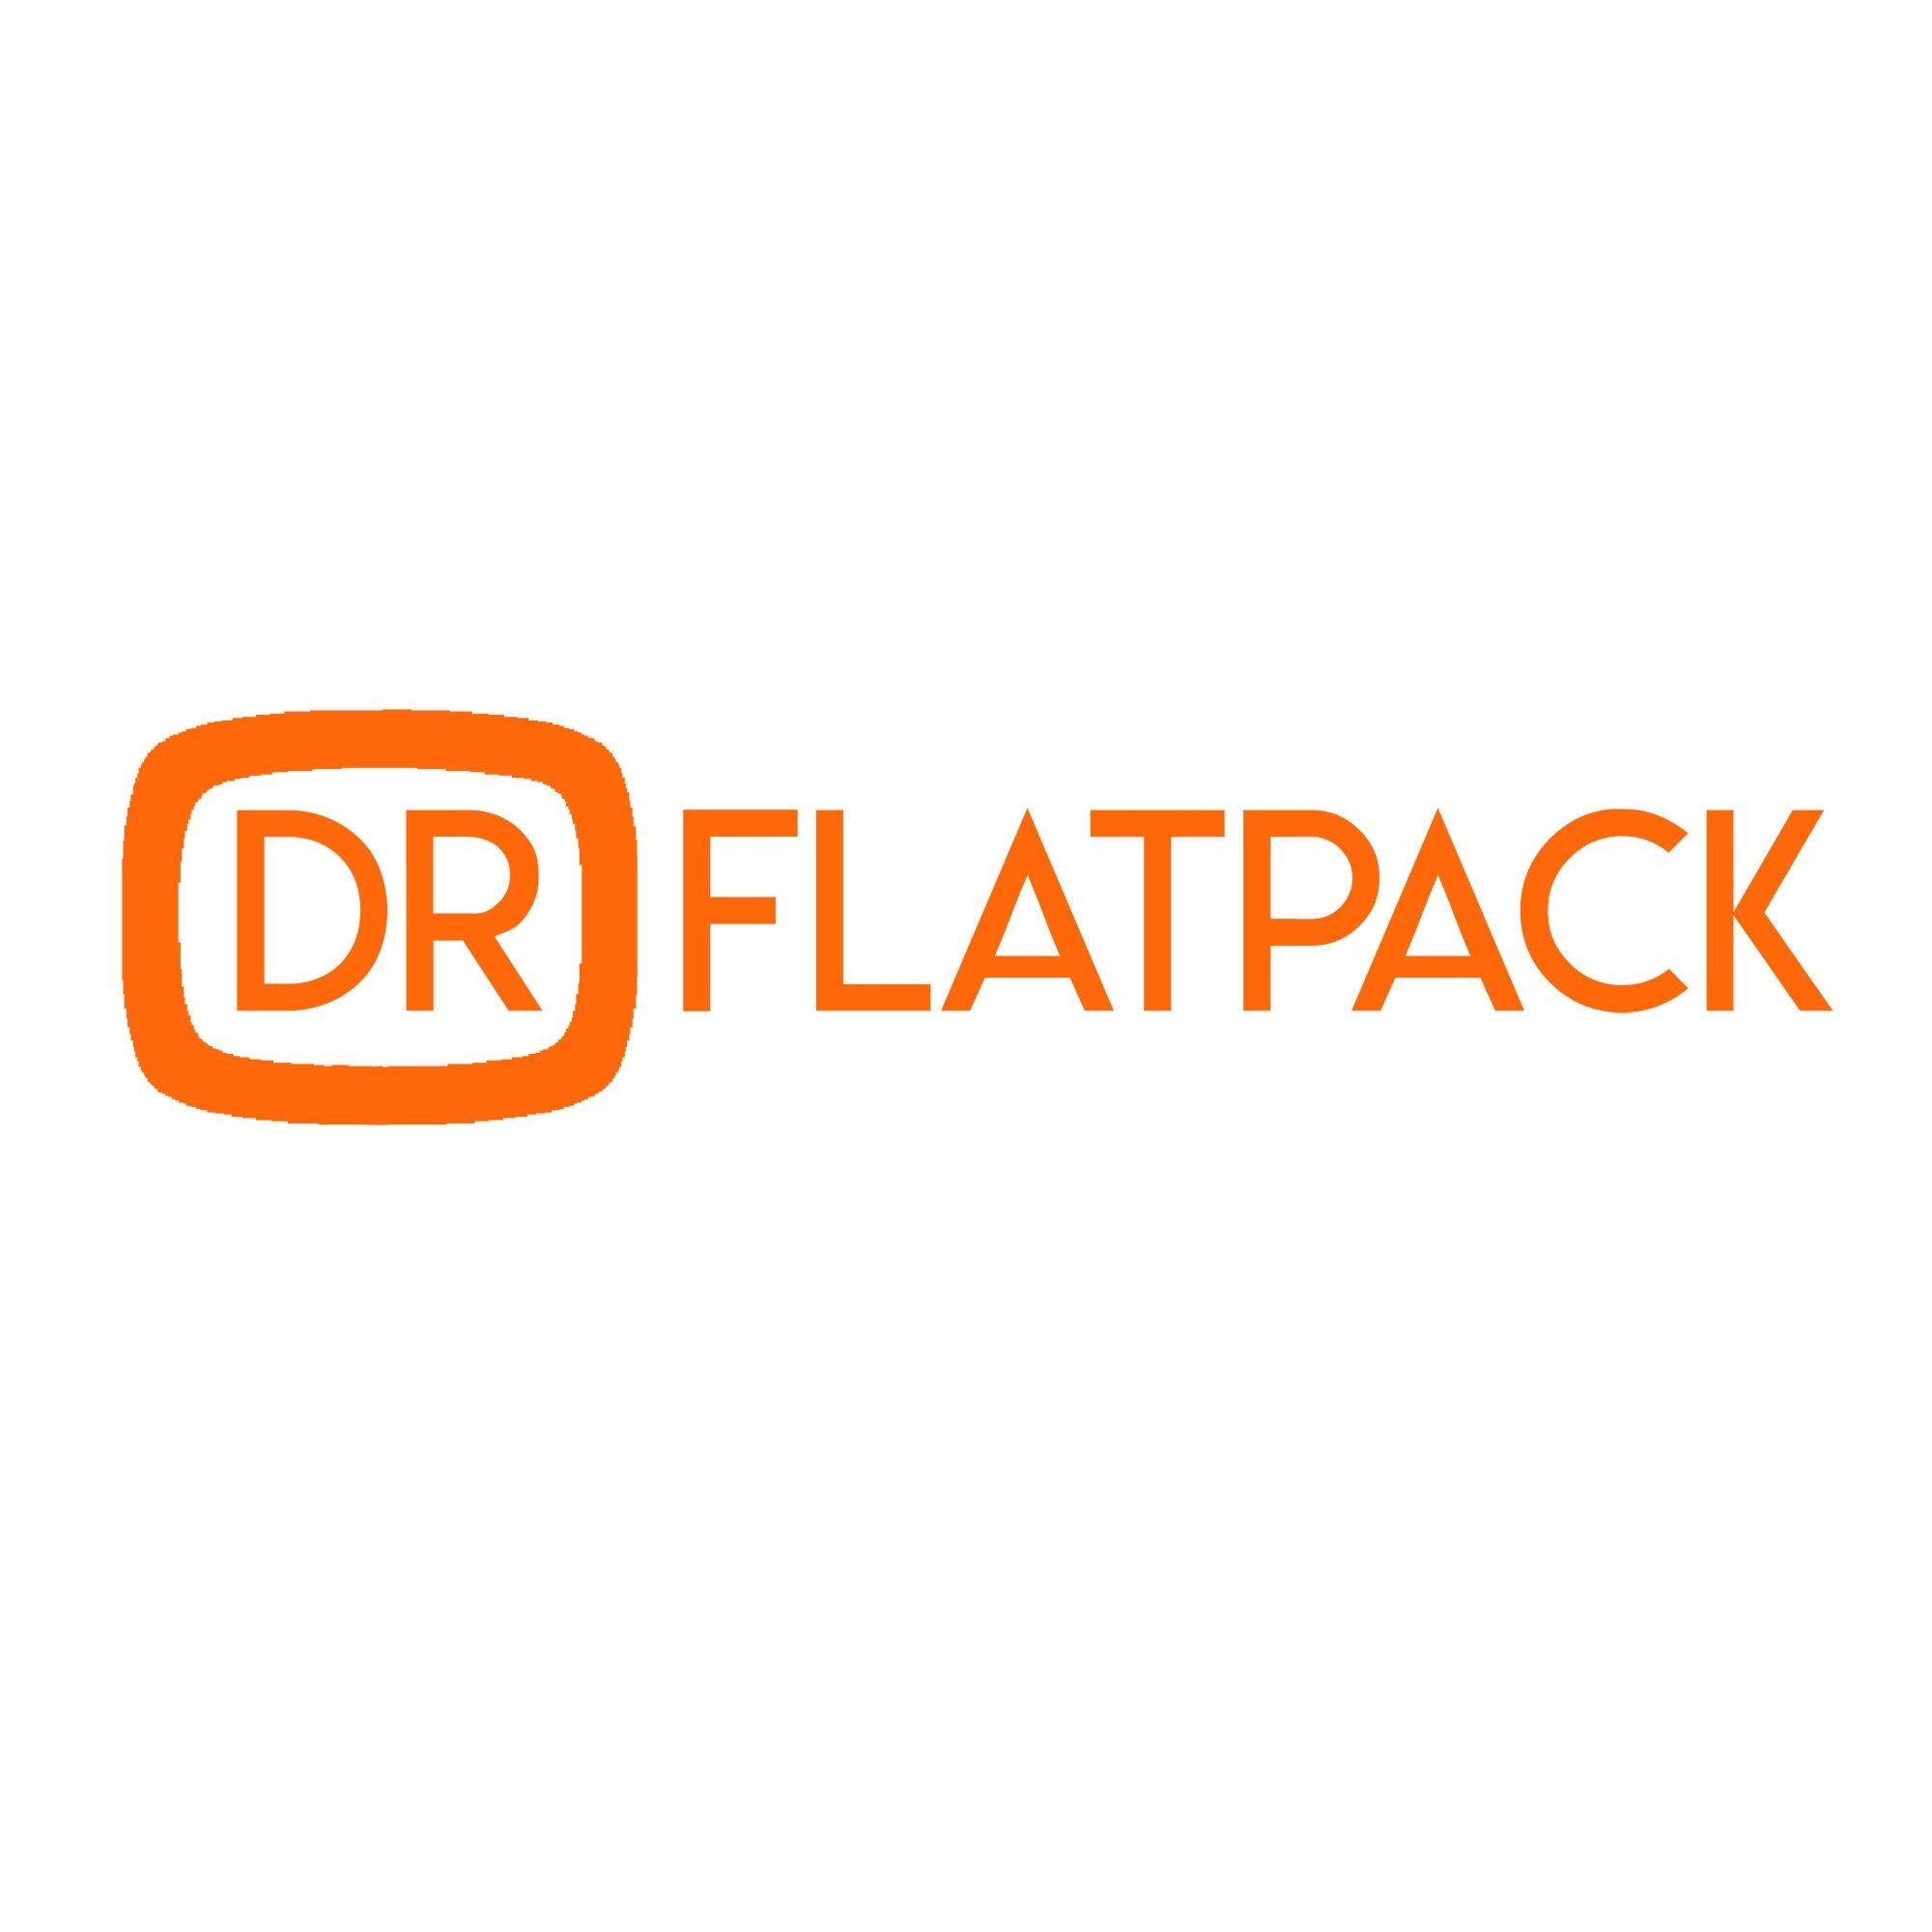 Dr Flat Pack